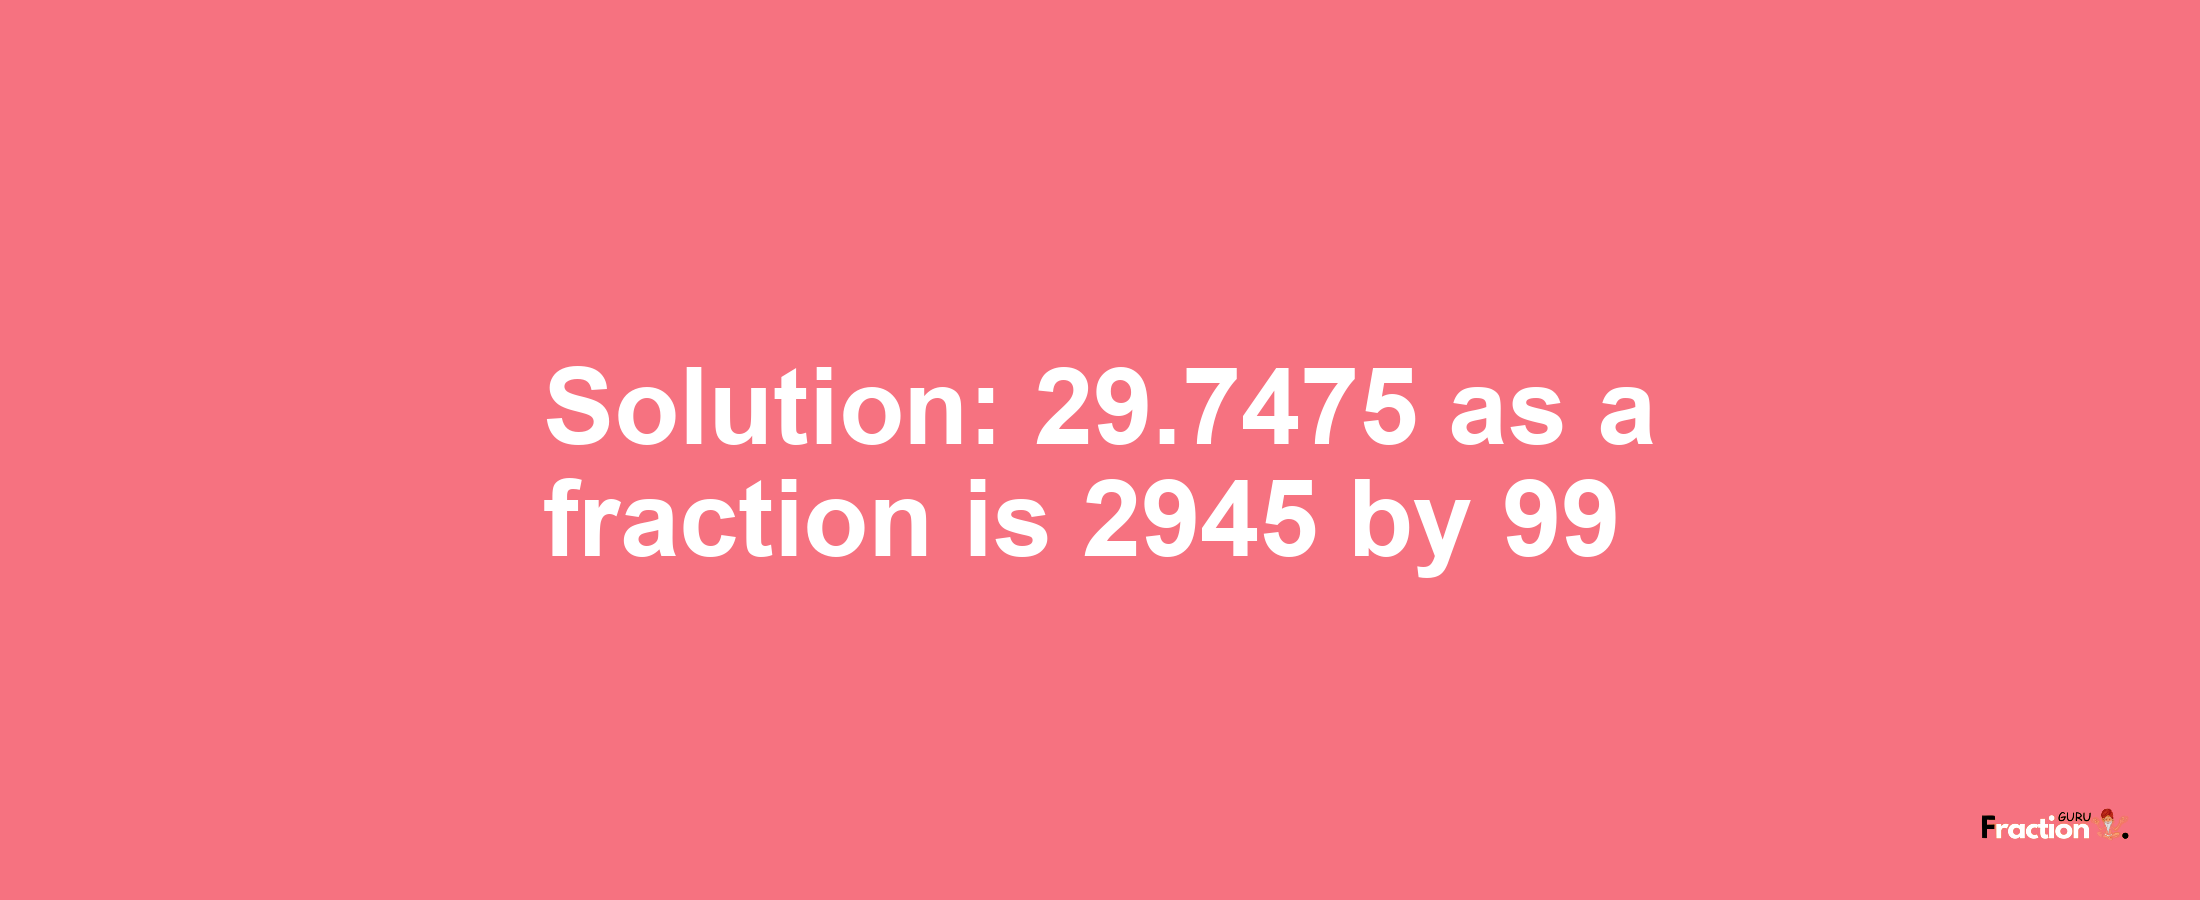 Solution:29.7475 as a fraction is 2945/99